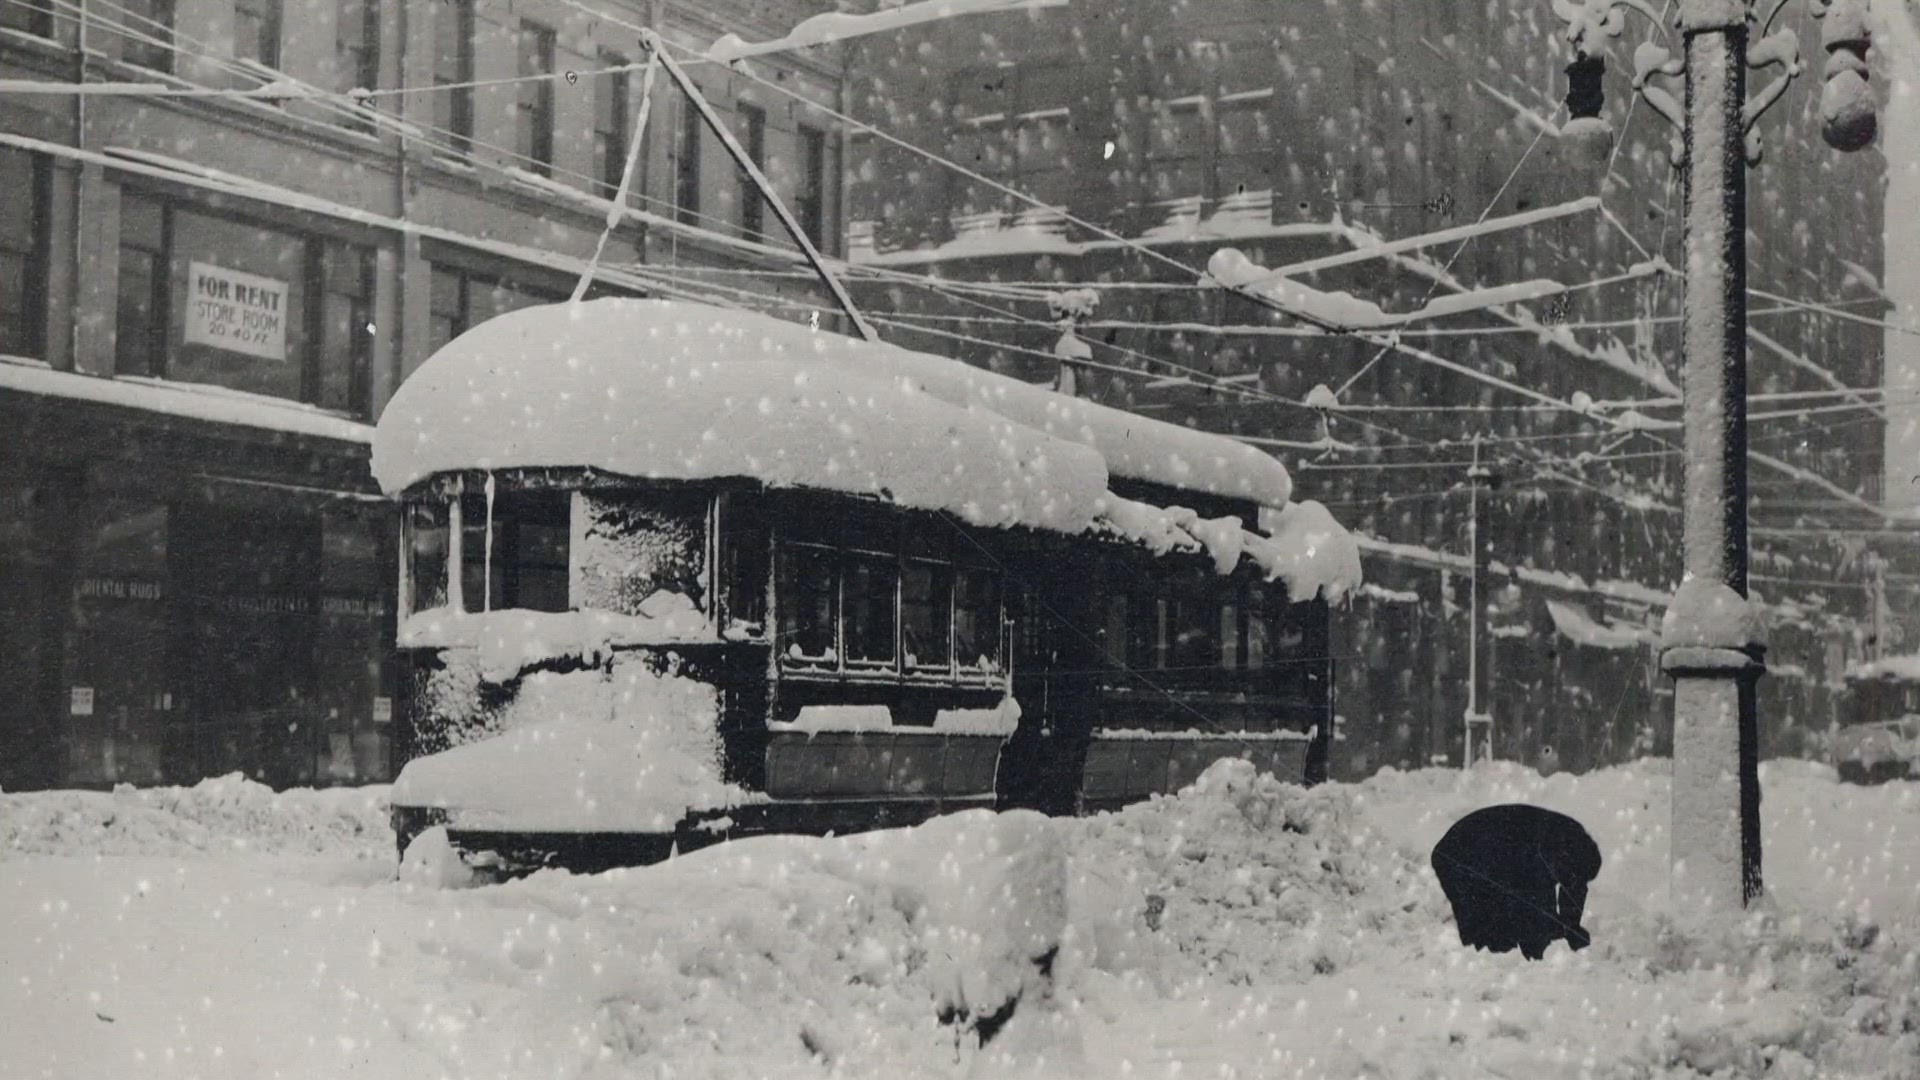 Denver's biggest snowstorm ever recorded was 110 years ago this week ...